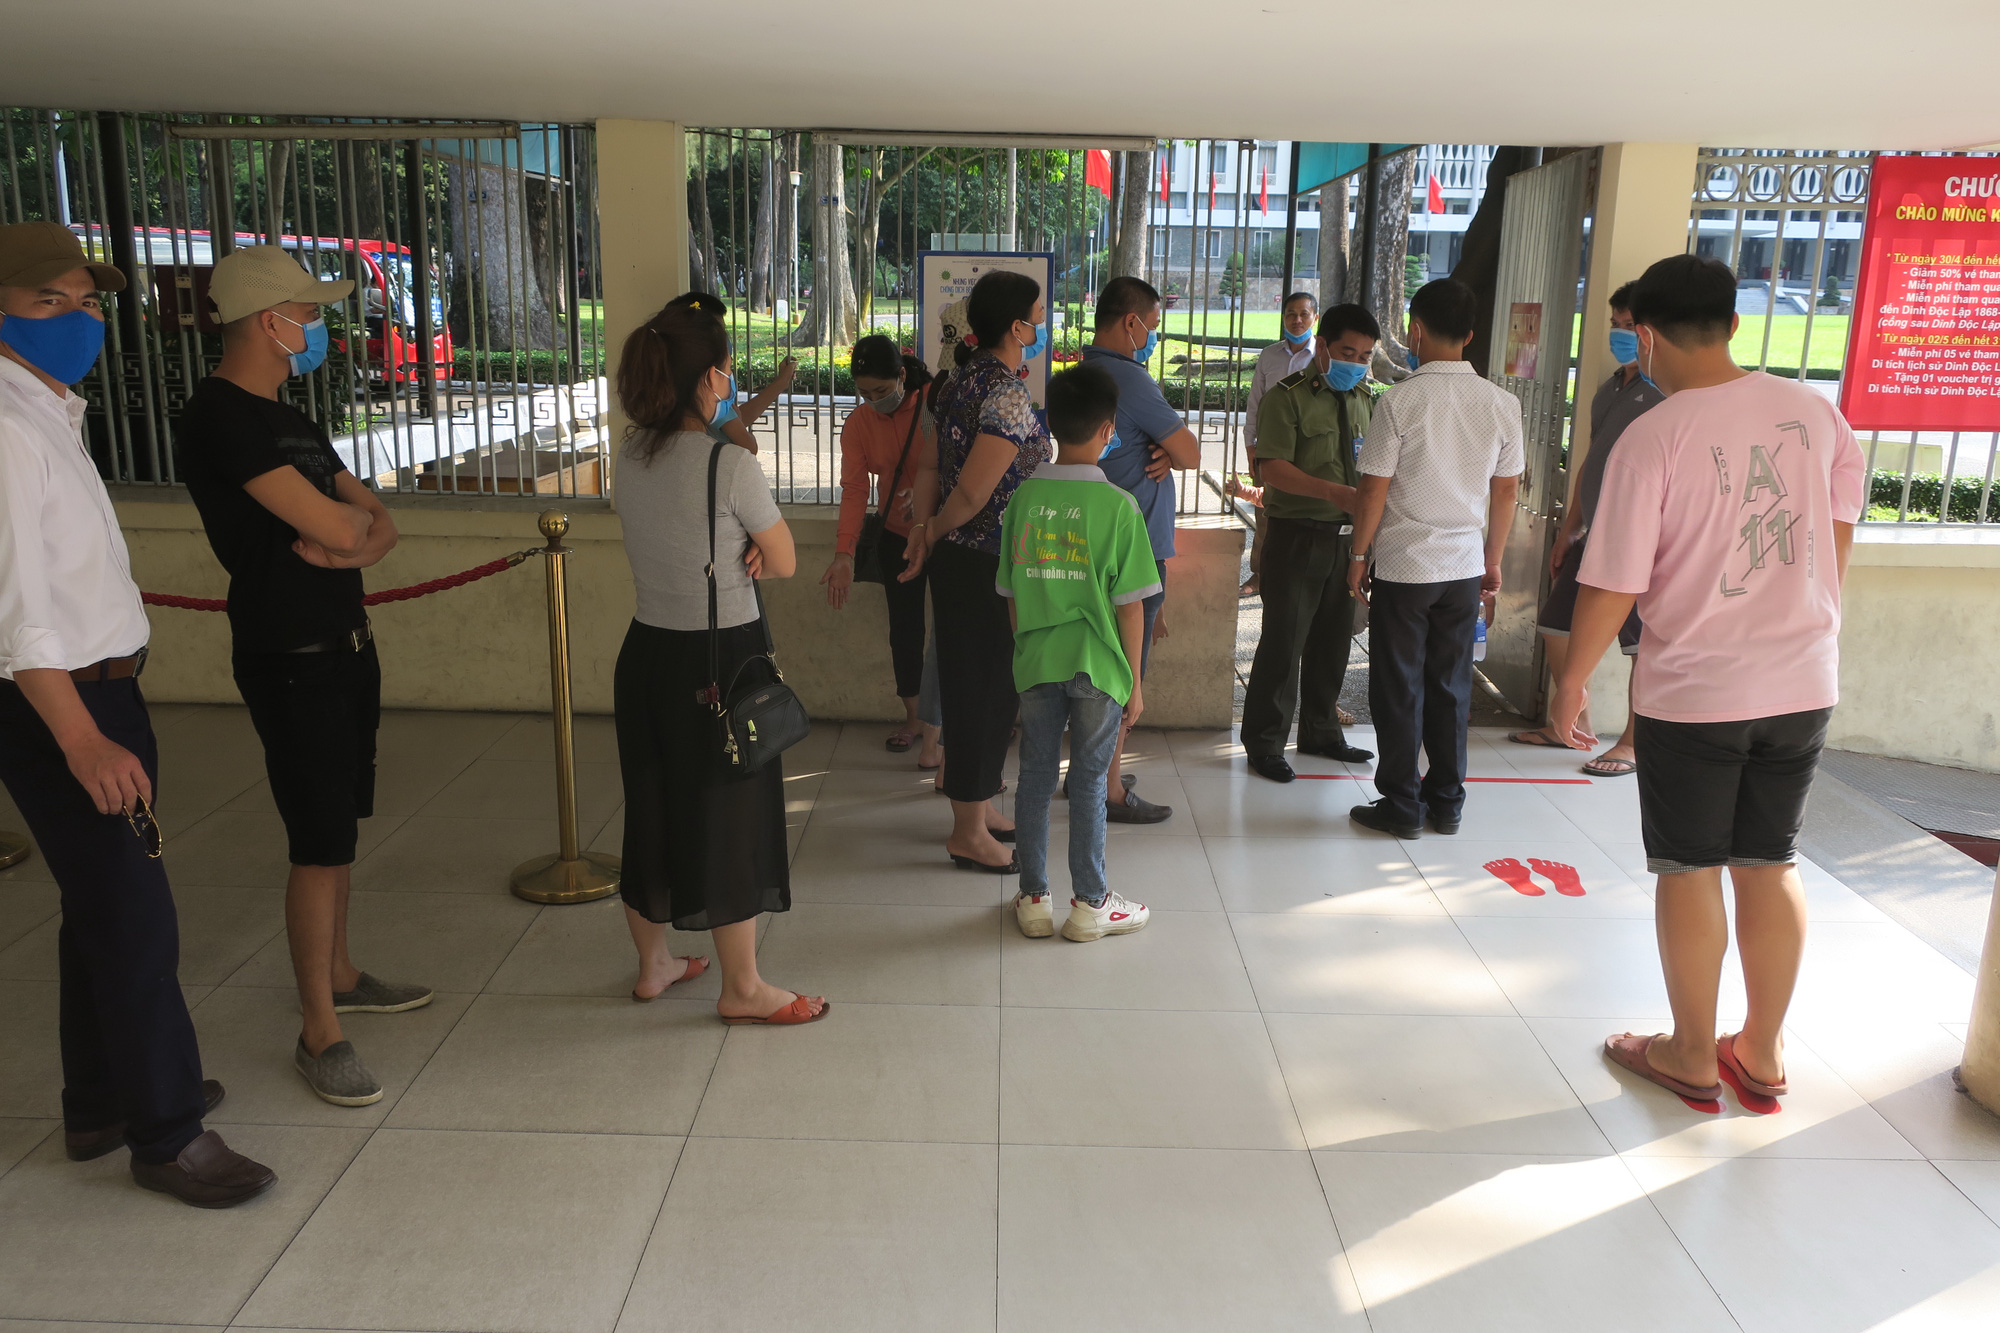 Visitors to the Reunification Palace in Ho Chi Minh City receive a body temperature check before entering the famous landmark amid the novel coronavirus disease (COVID-19) pandemic in Vietnam. Photo: T.T.D / Tuoi Tre